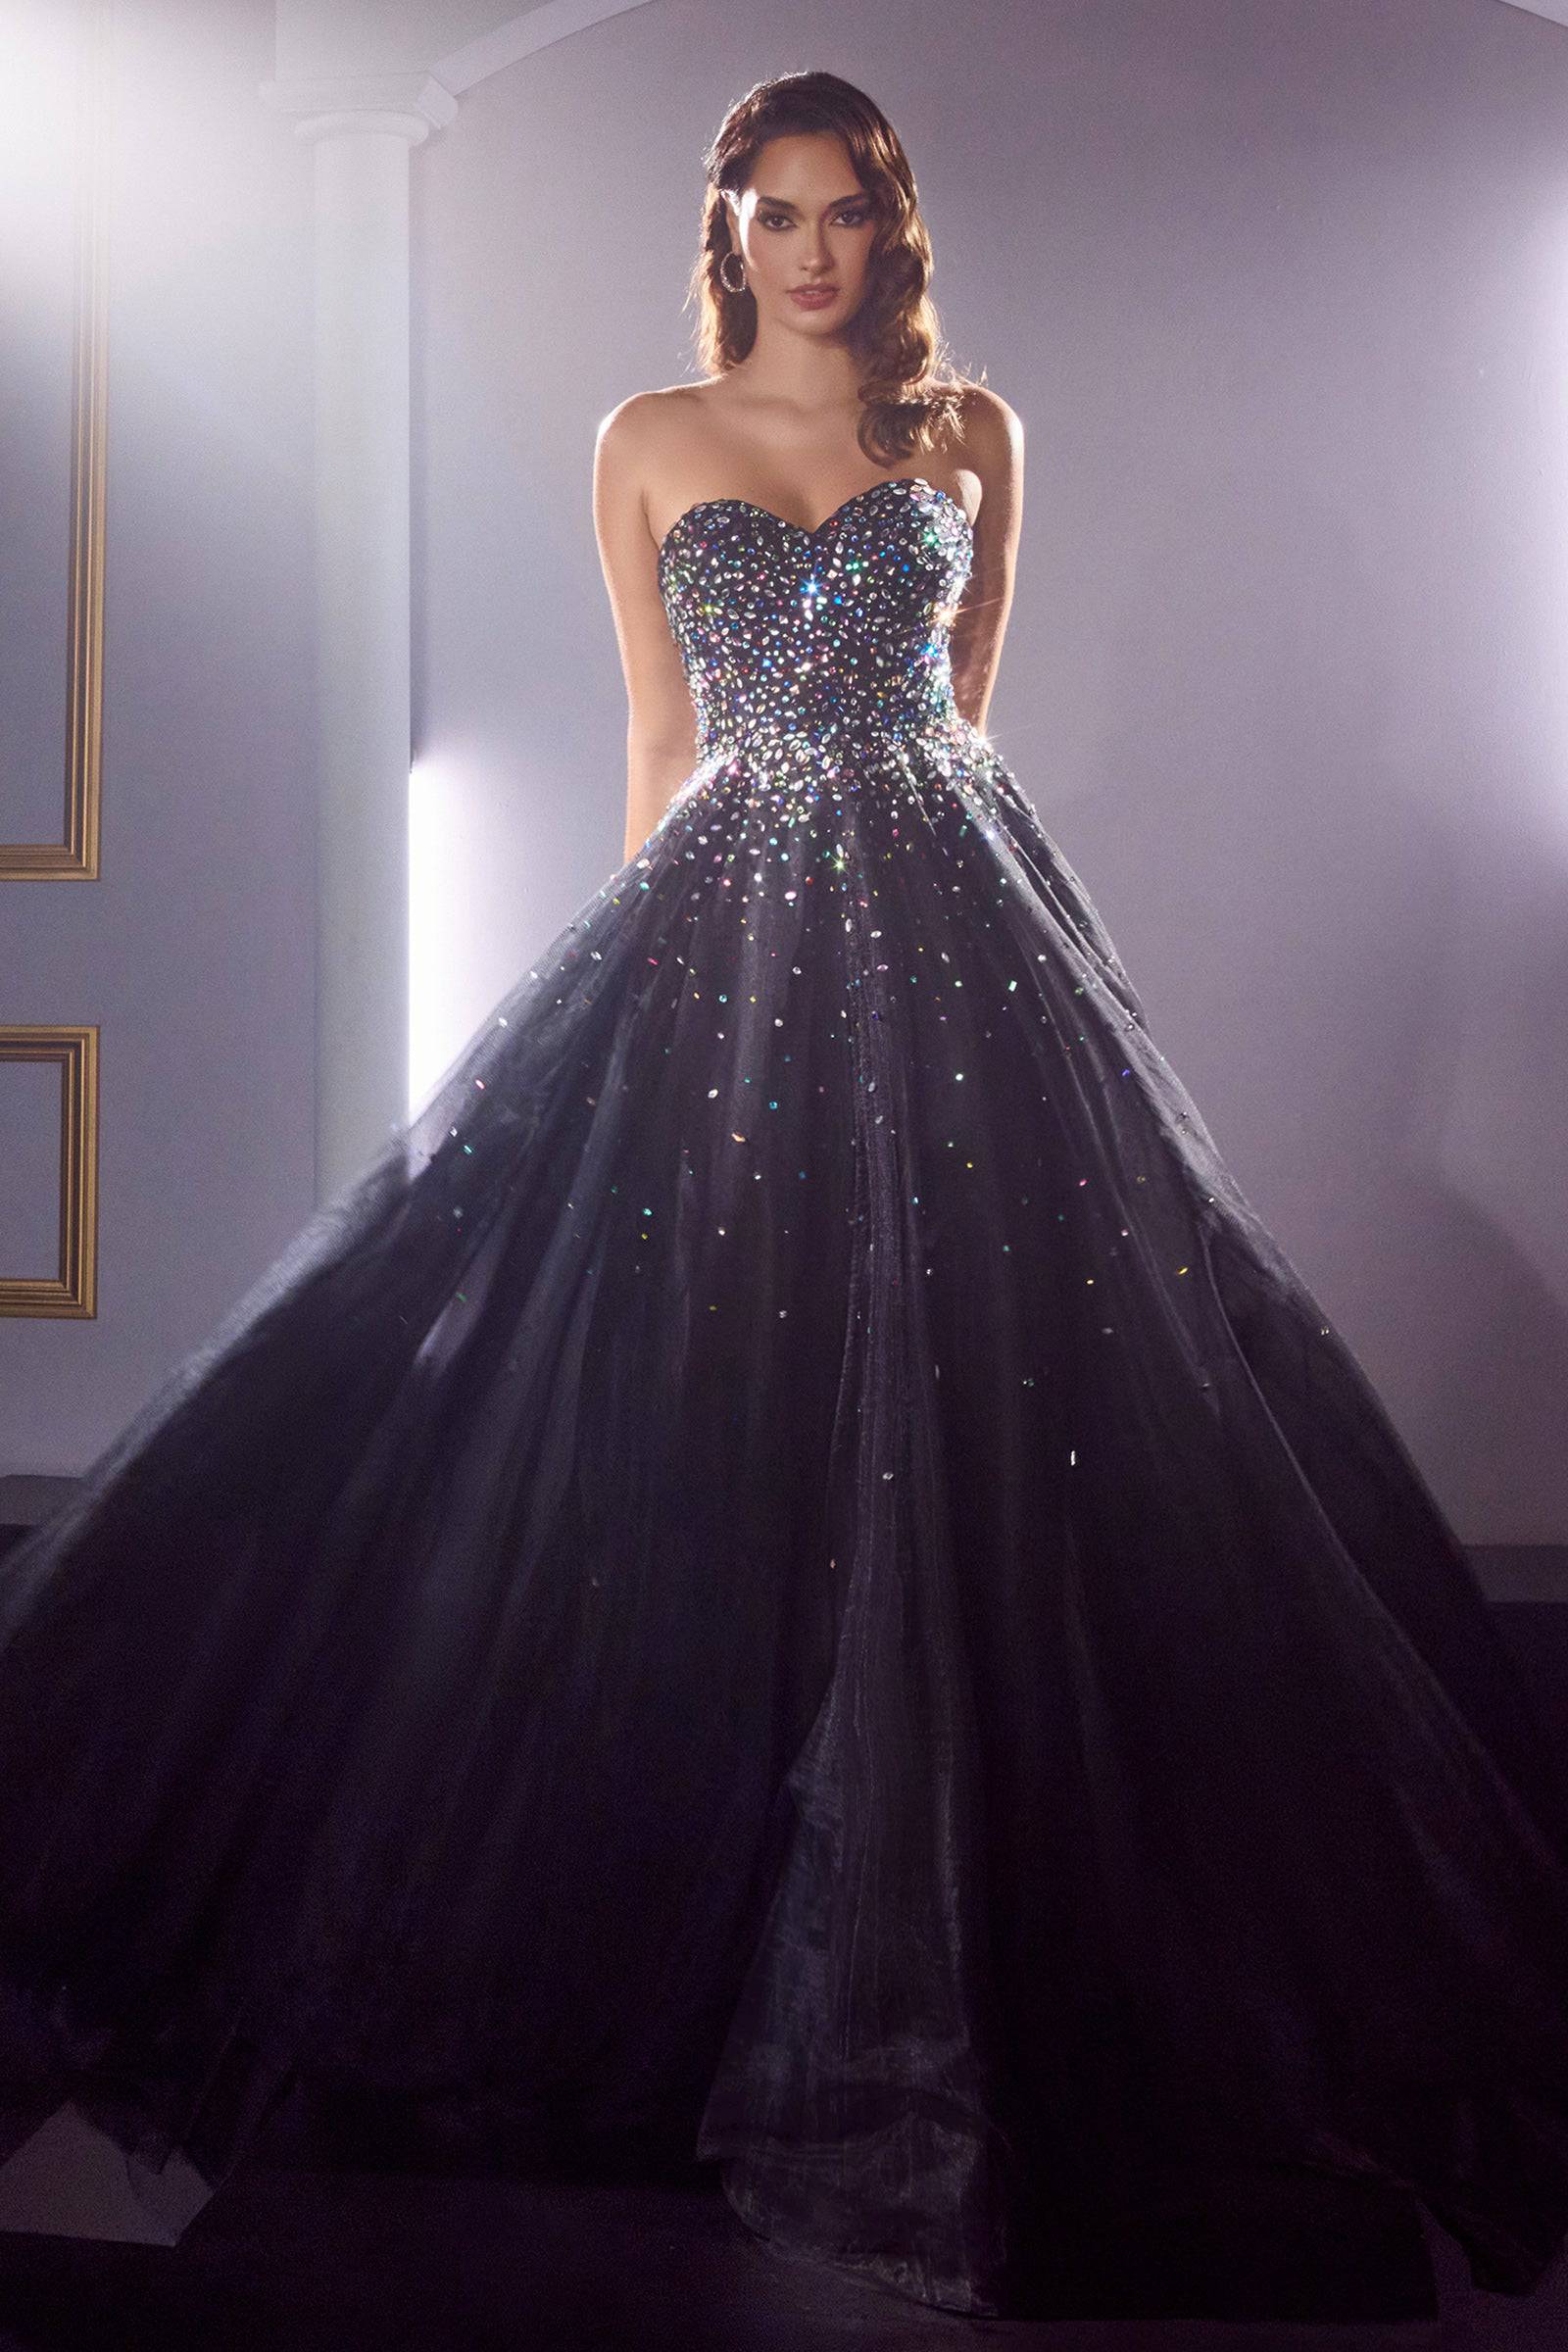 Spaghetti Straps Layered Glitter Ball Gown CD996 – Sparkly Gowns